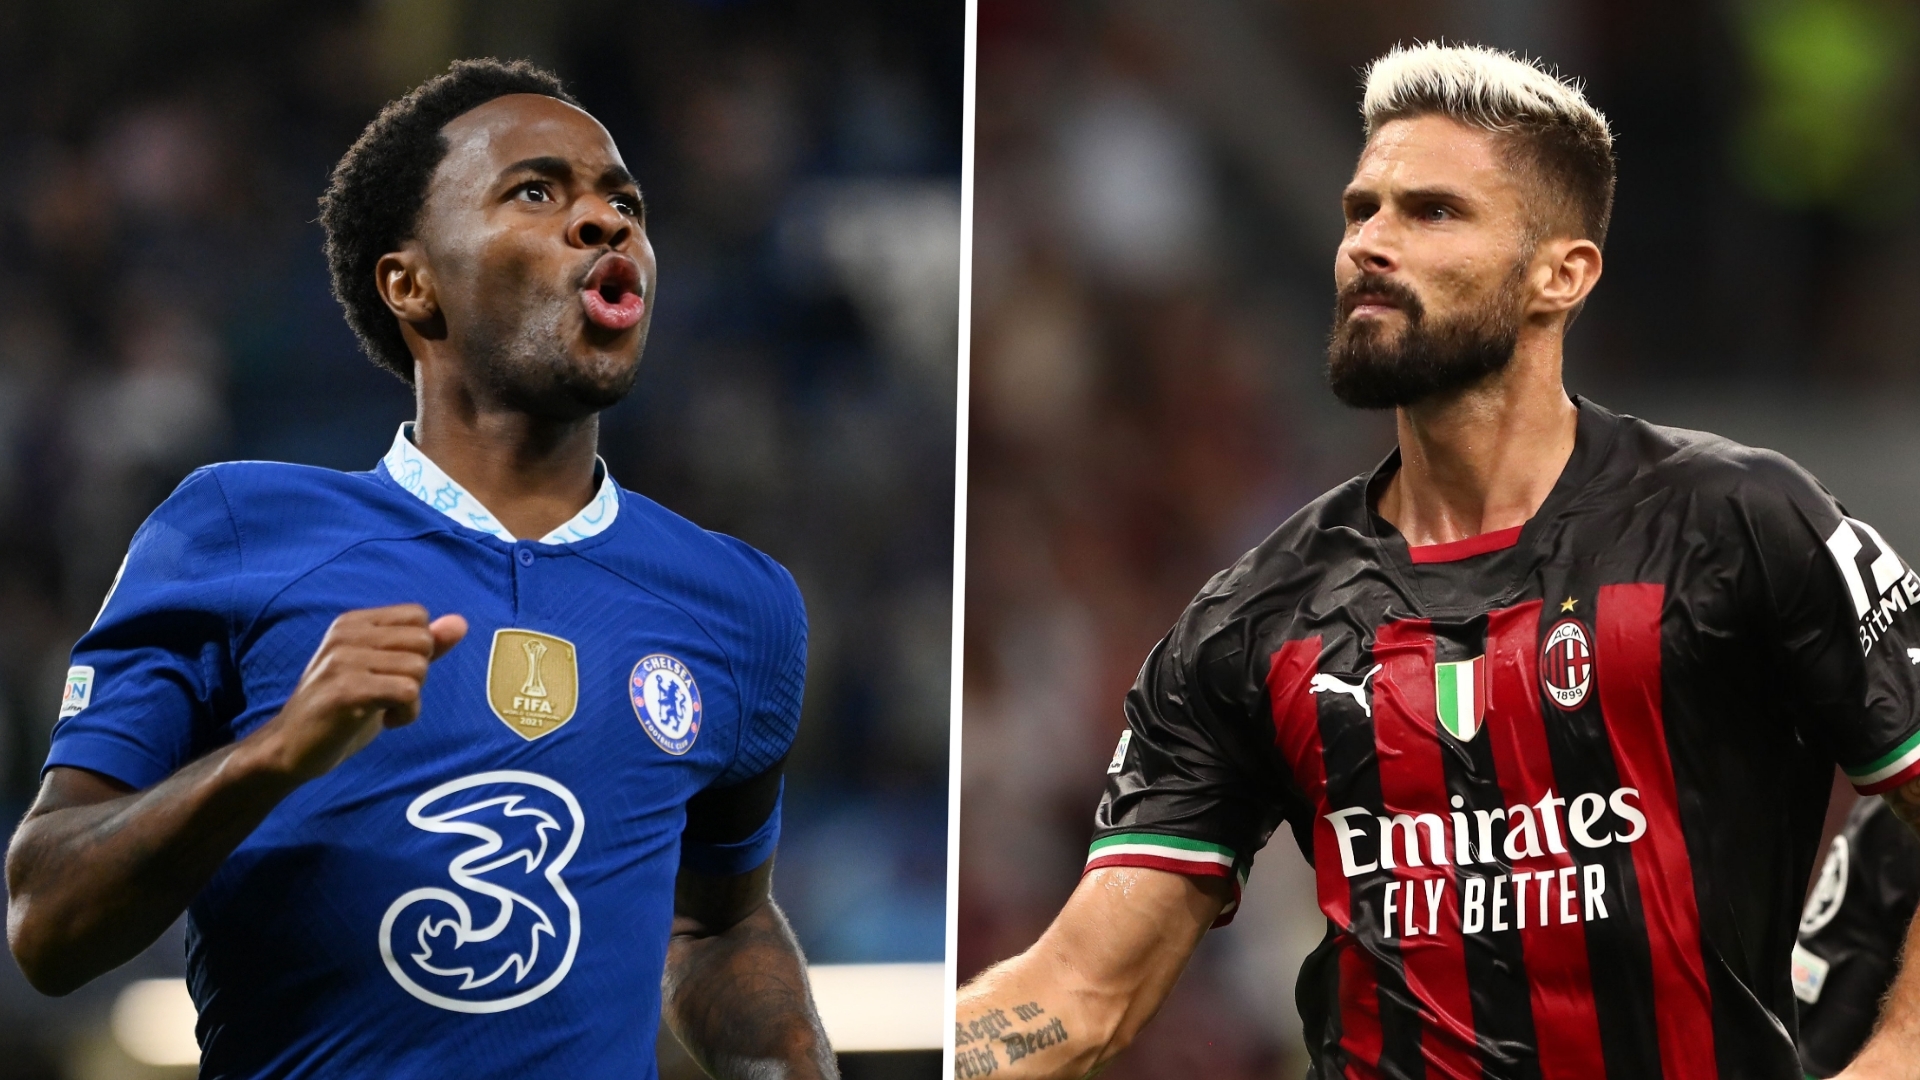 Chelsea vs AC Milan: Live stream, TV channel, kick-off time & where to watch | Goal.com India